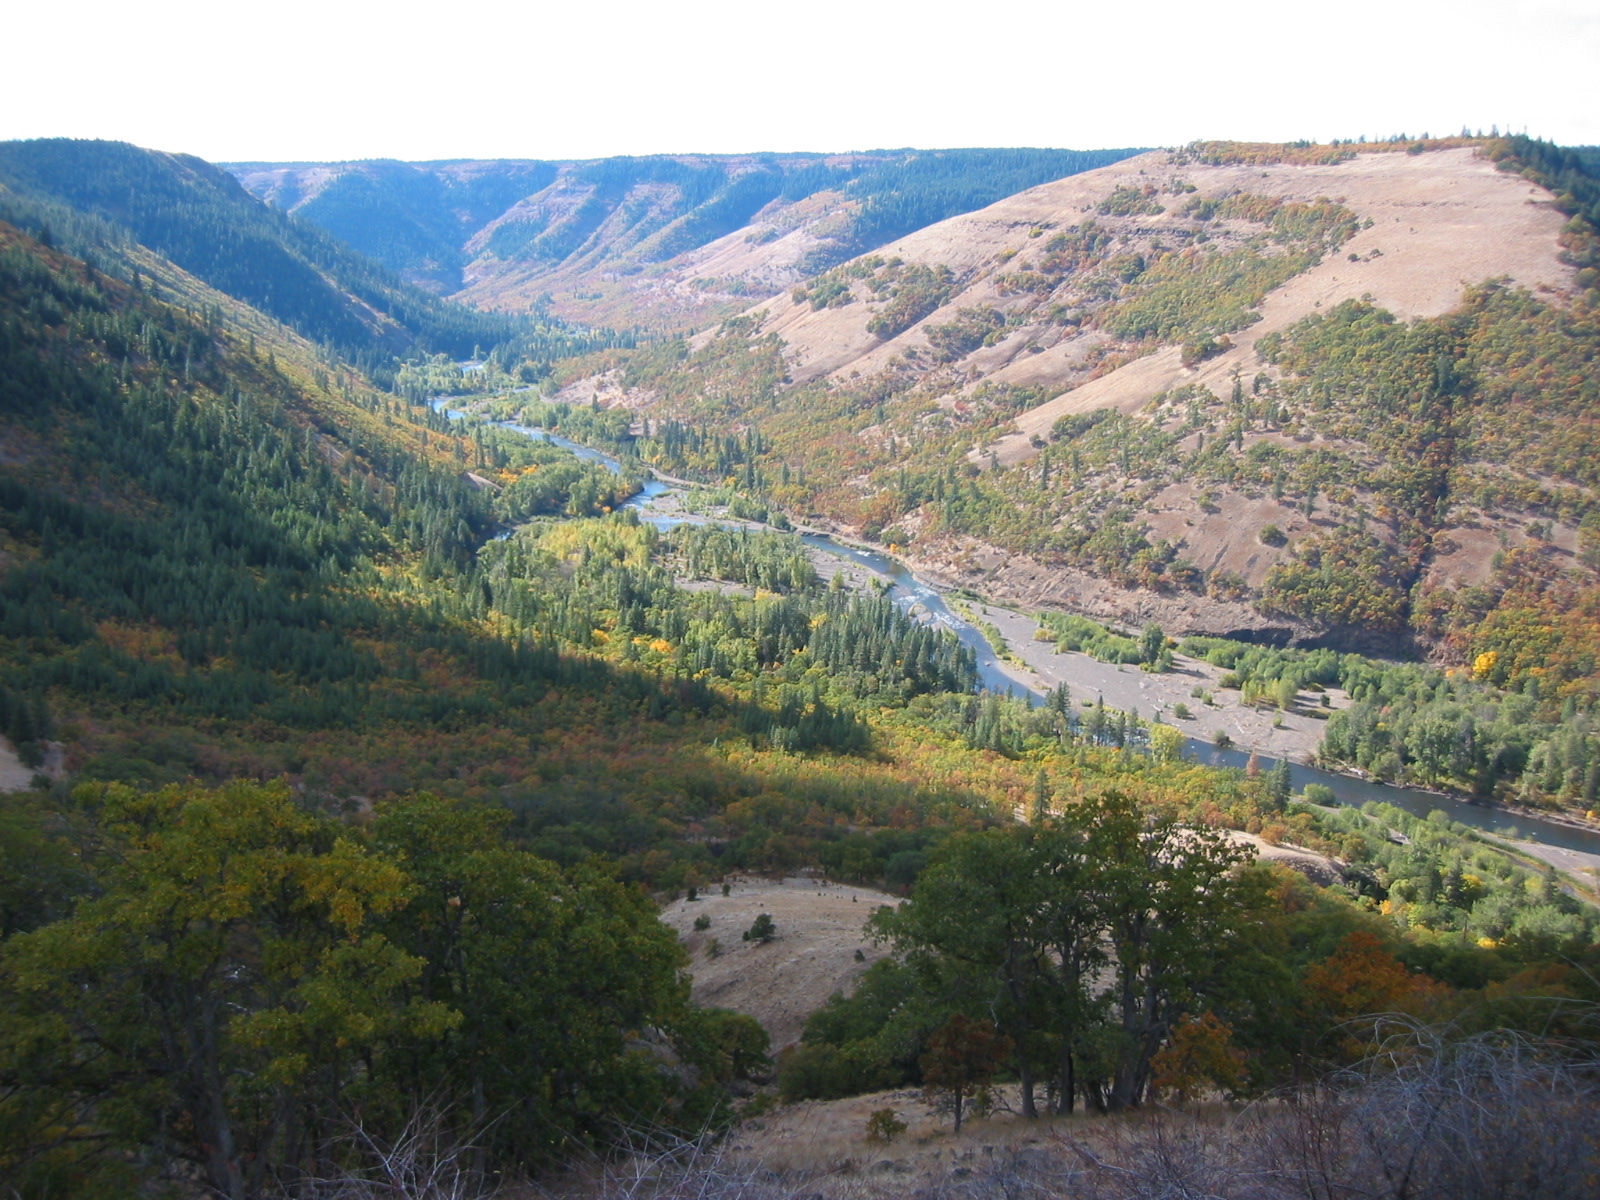 The scenic Klickitat River cuts a canyon through the heart of the state's Klickitat Wildlife Area.